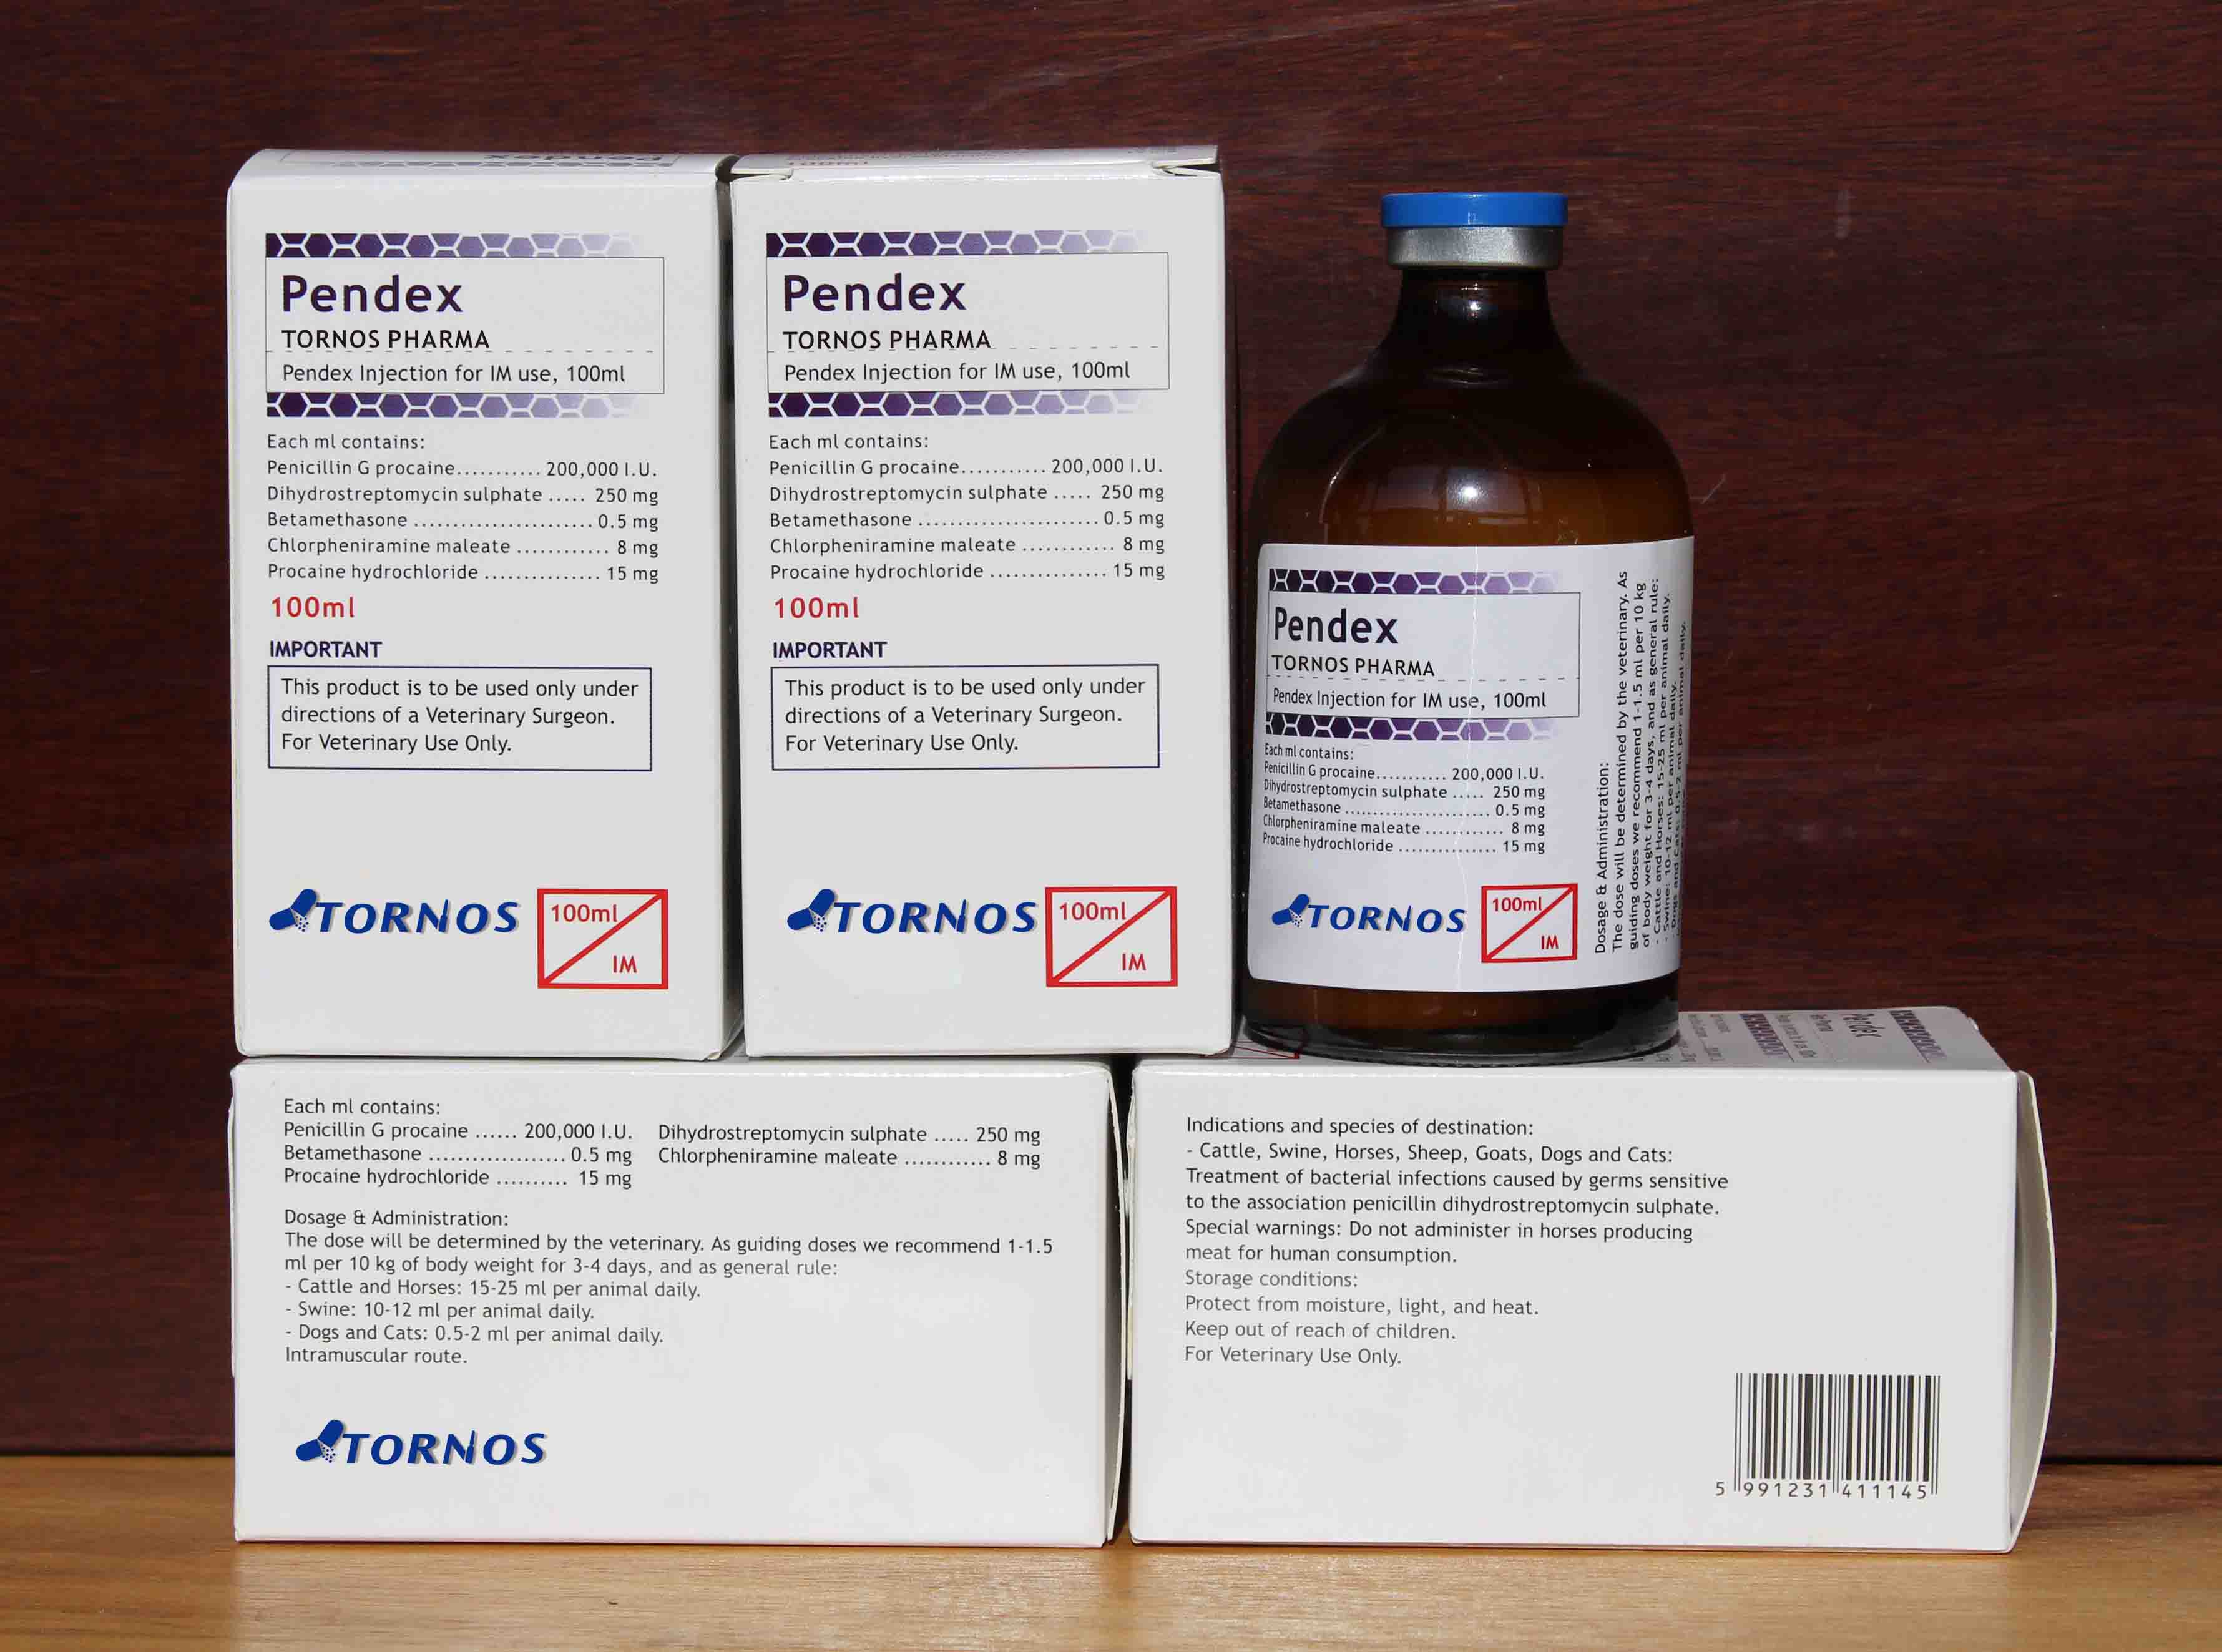 Pendex for injection 100ml